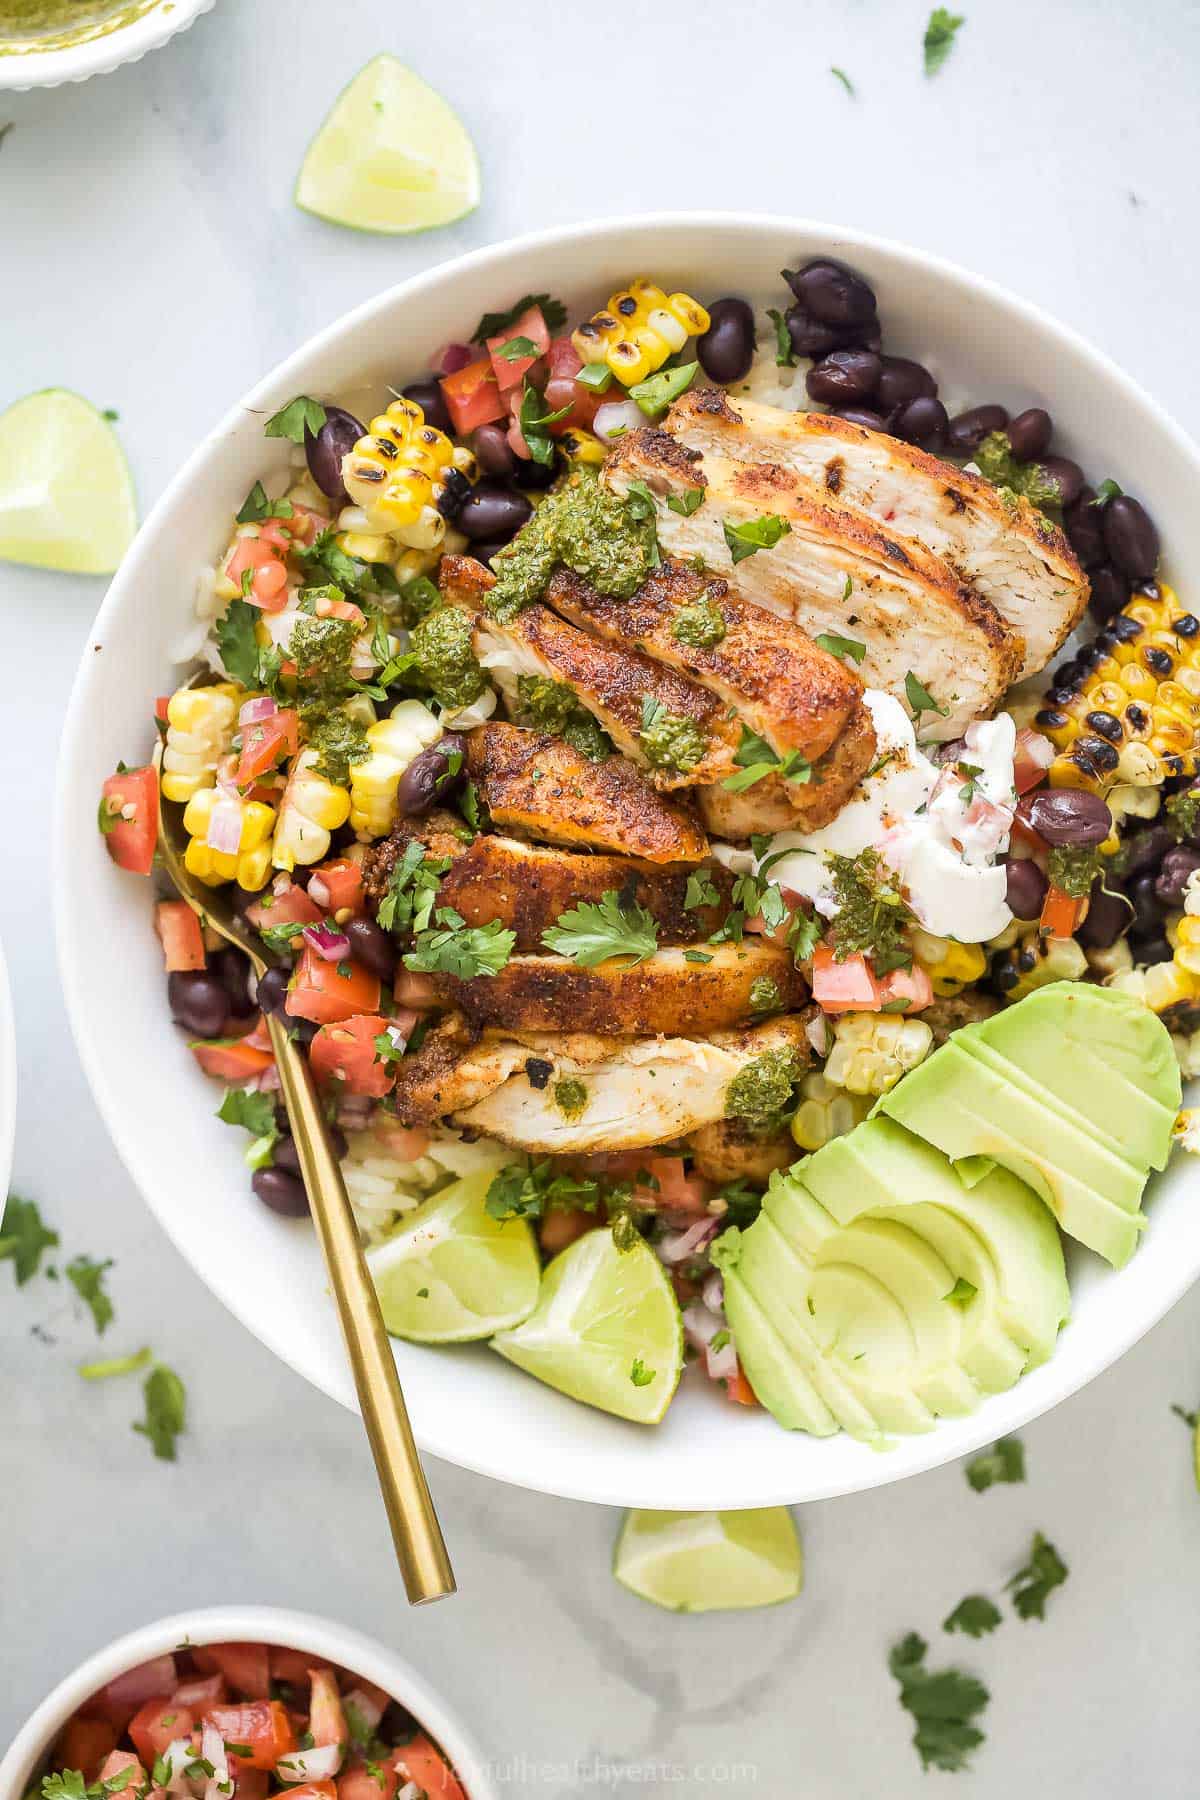 Chicken burrito bowl with avocado, lime wedges, and other toppings.